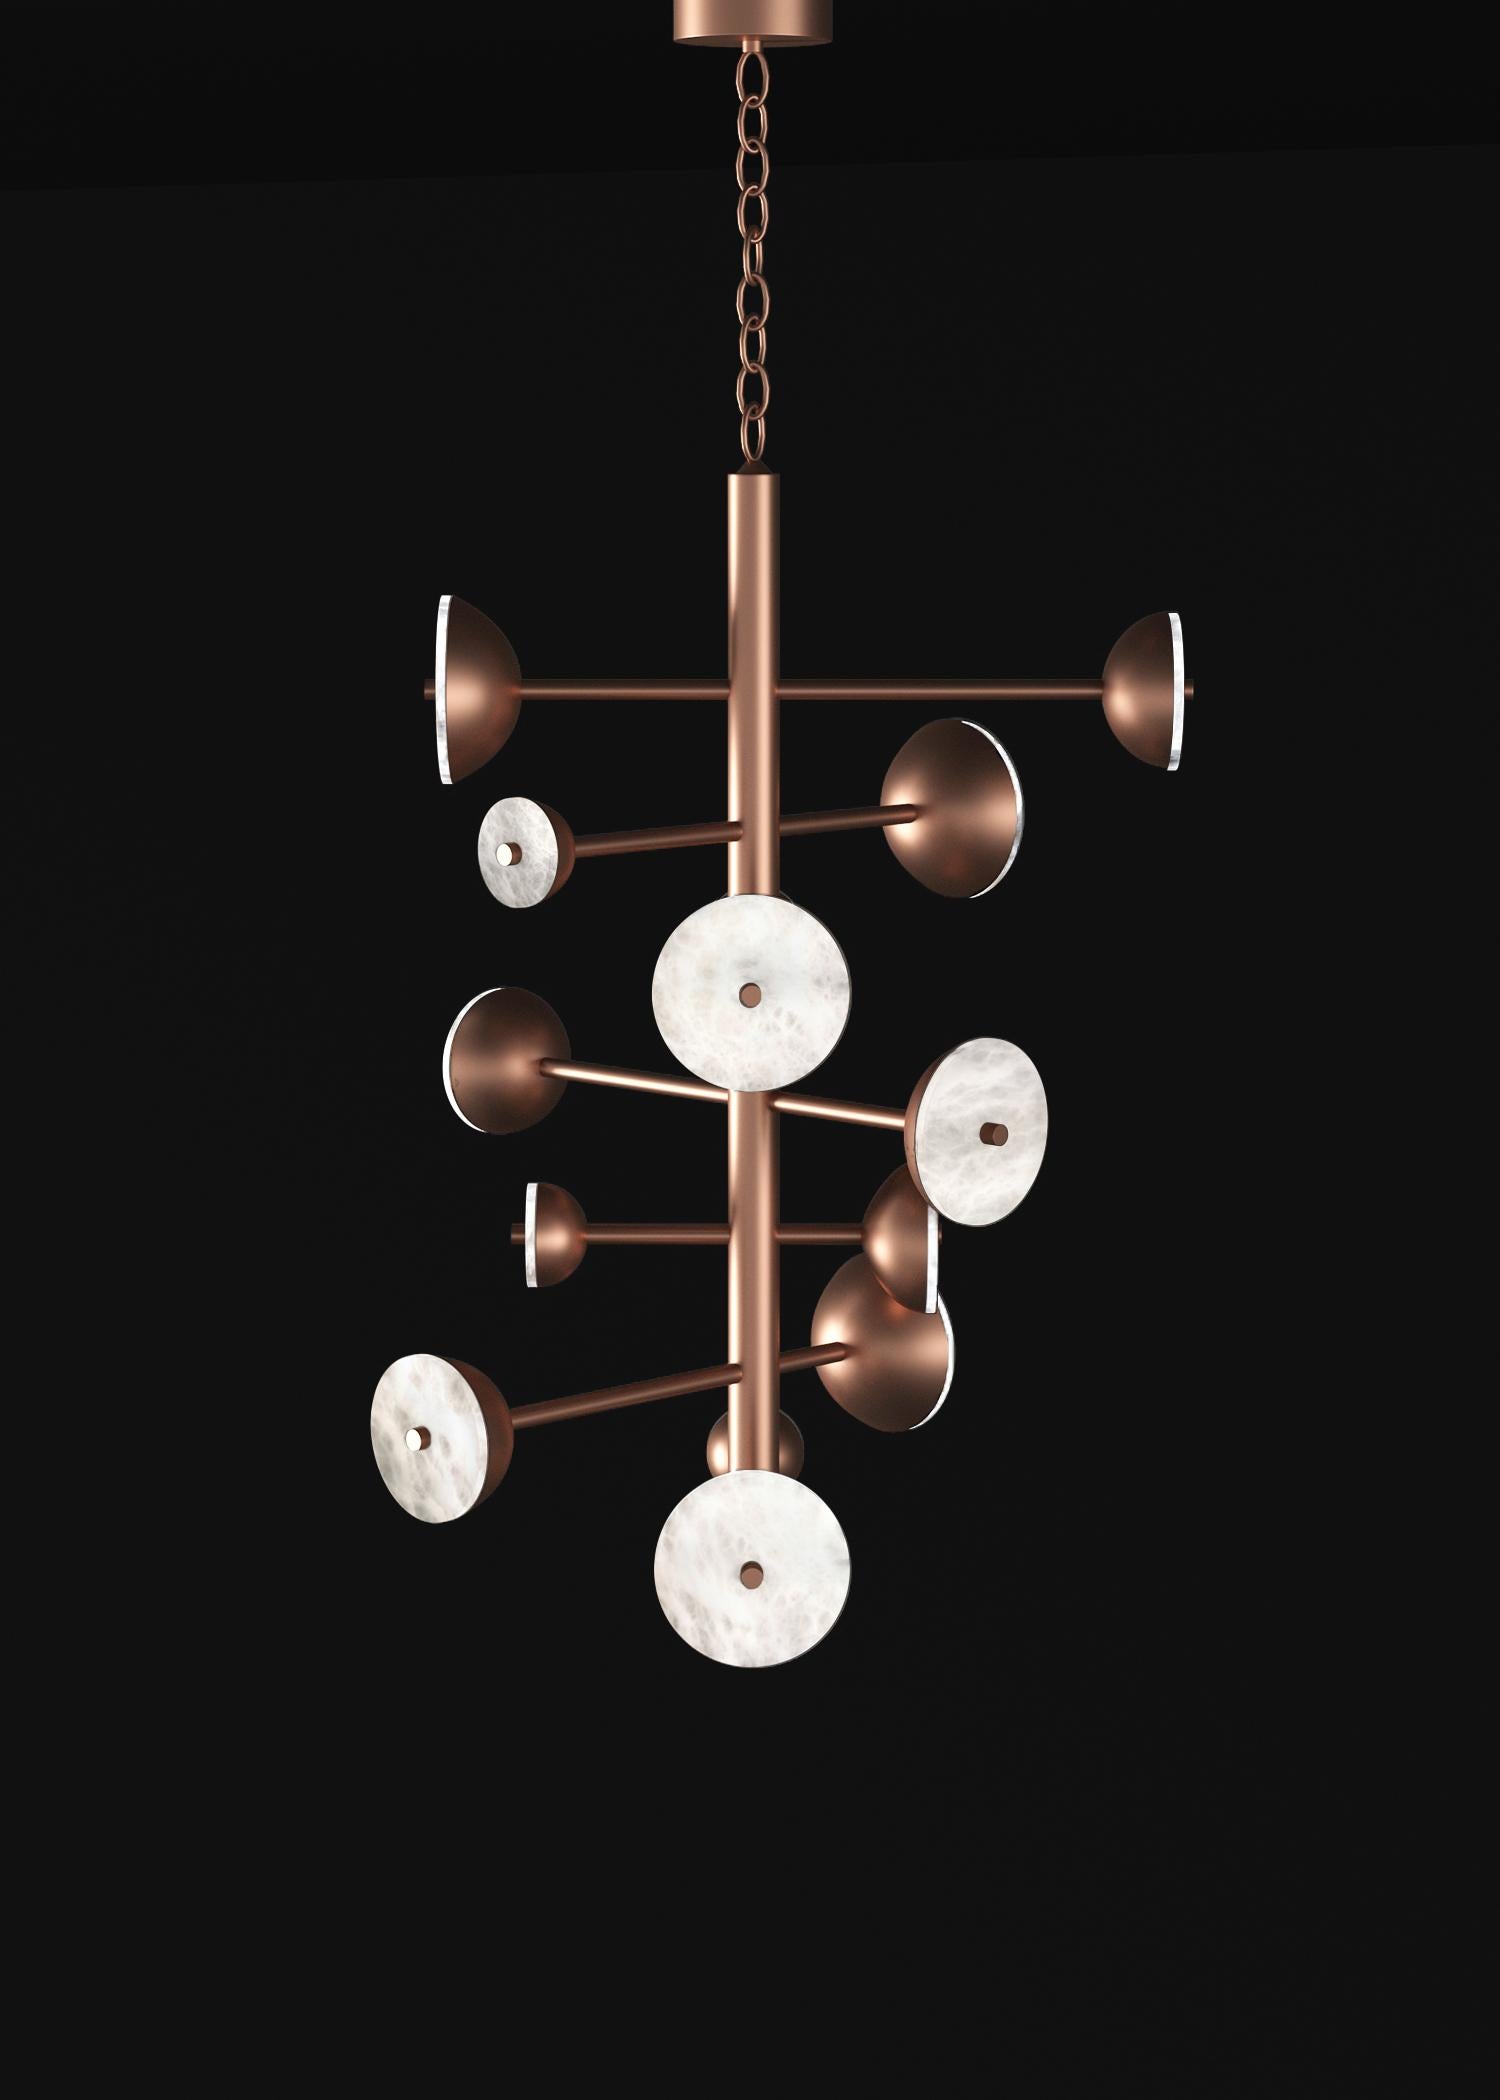 Teti Copper Chandelier by Alabastro Italiano
Dimensions: D 74,5 x W 77,5 x H 110 cm.
Materials: White alabaster and copper.

Available in different finishes: Shiny Silver, Bronze, Brushed Brass, Ruggine of Florence, Brushed Burnished, Shiny Gold,